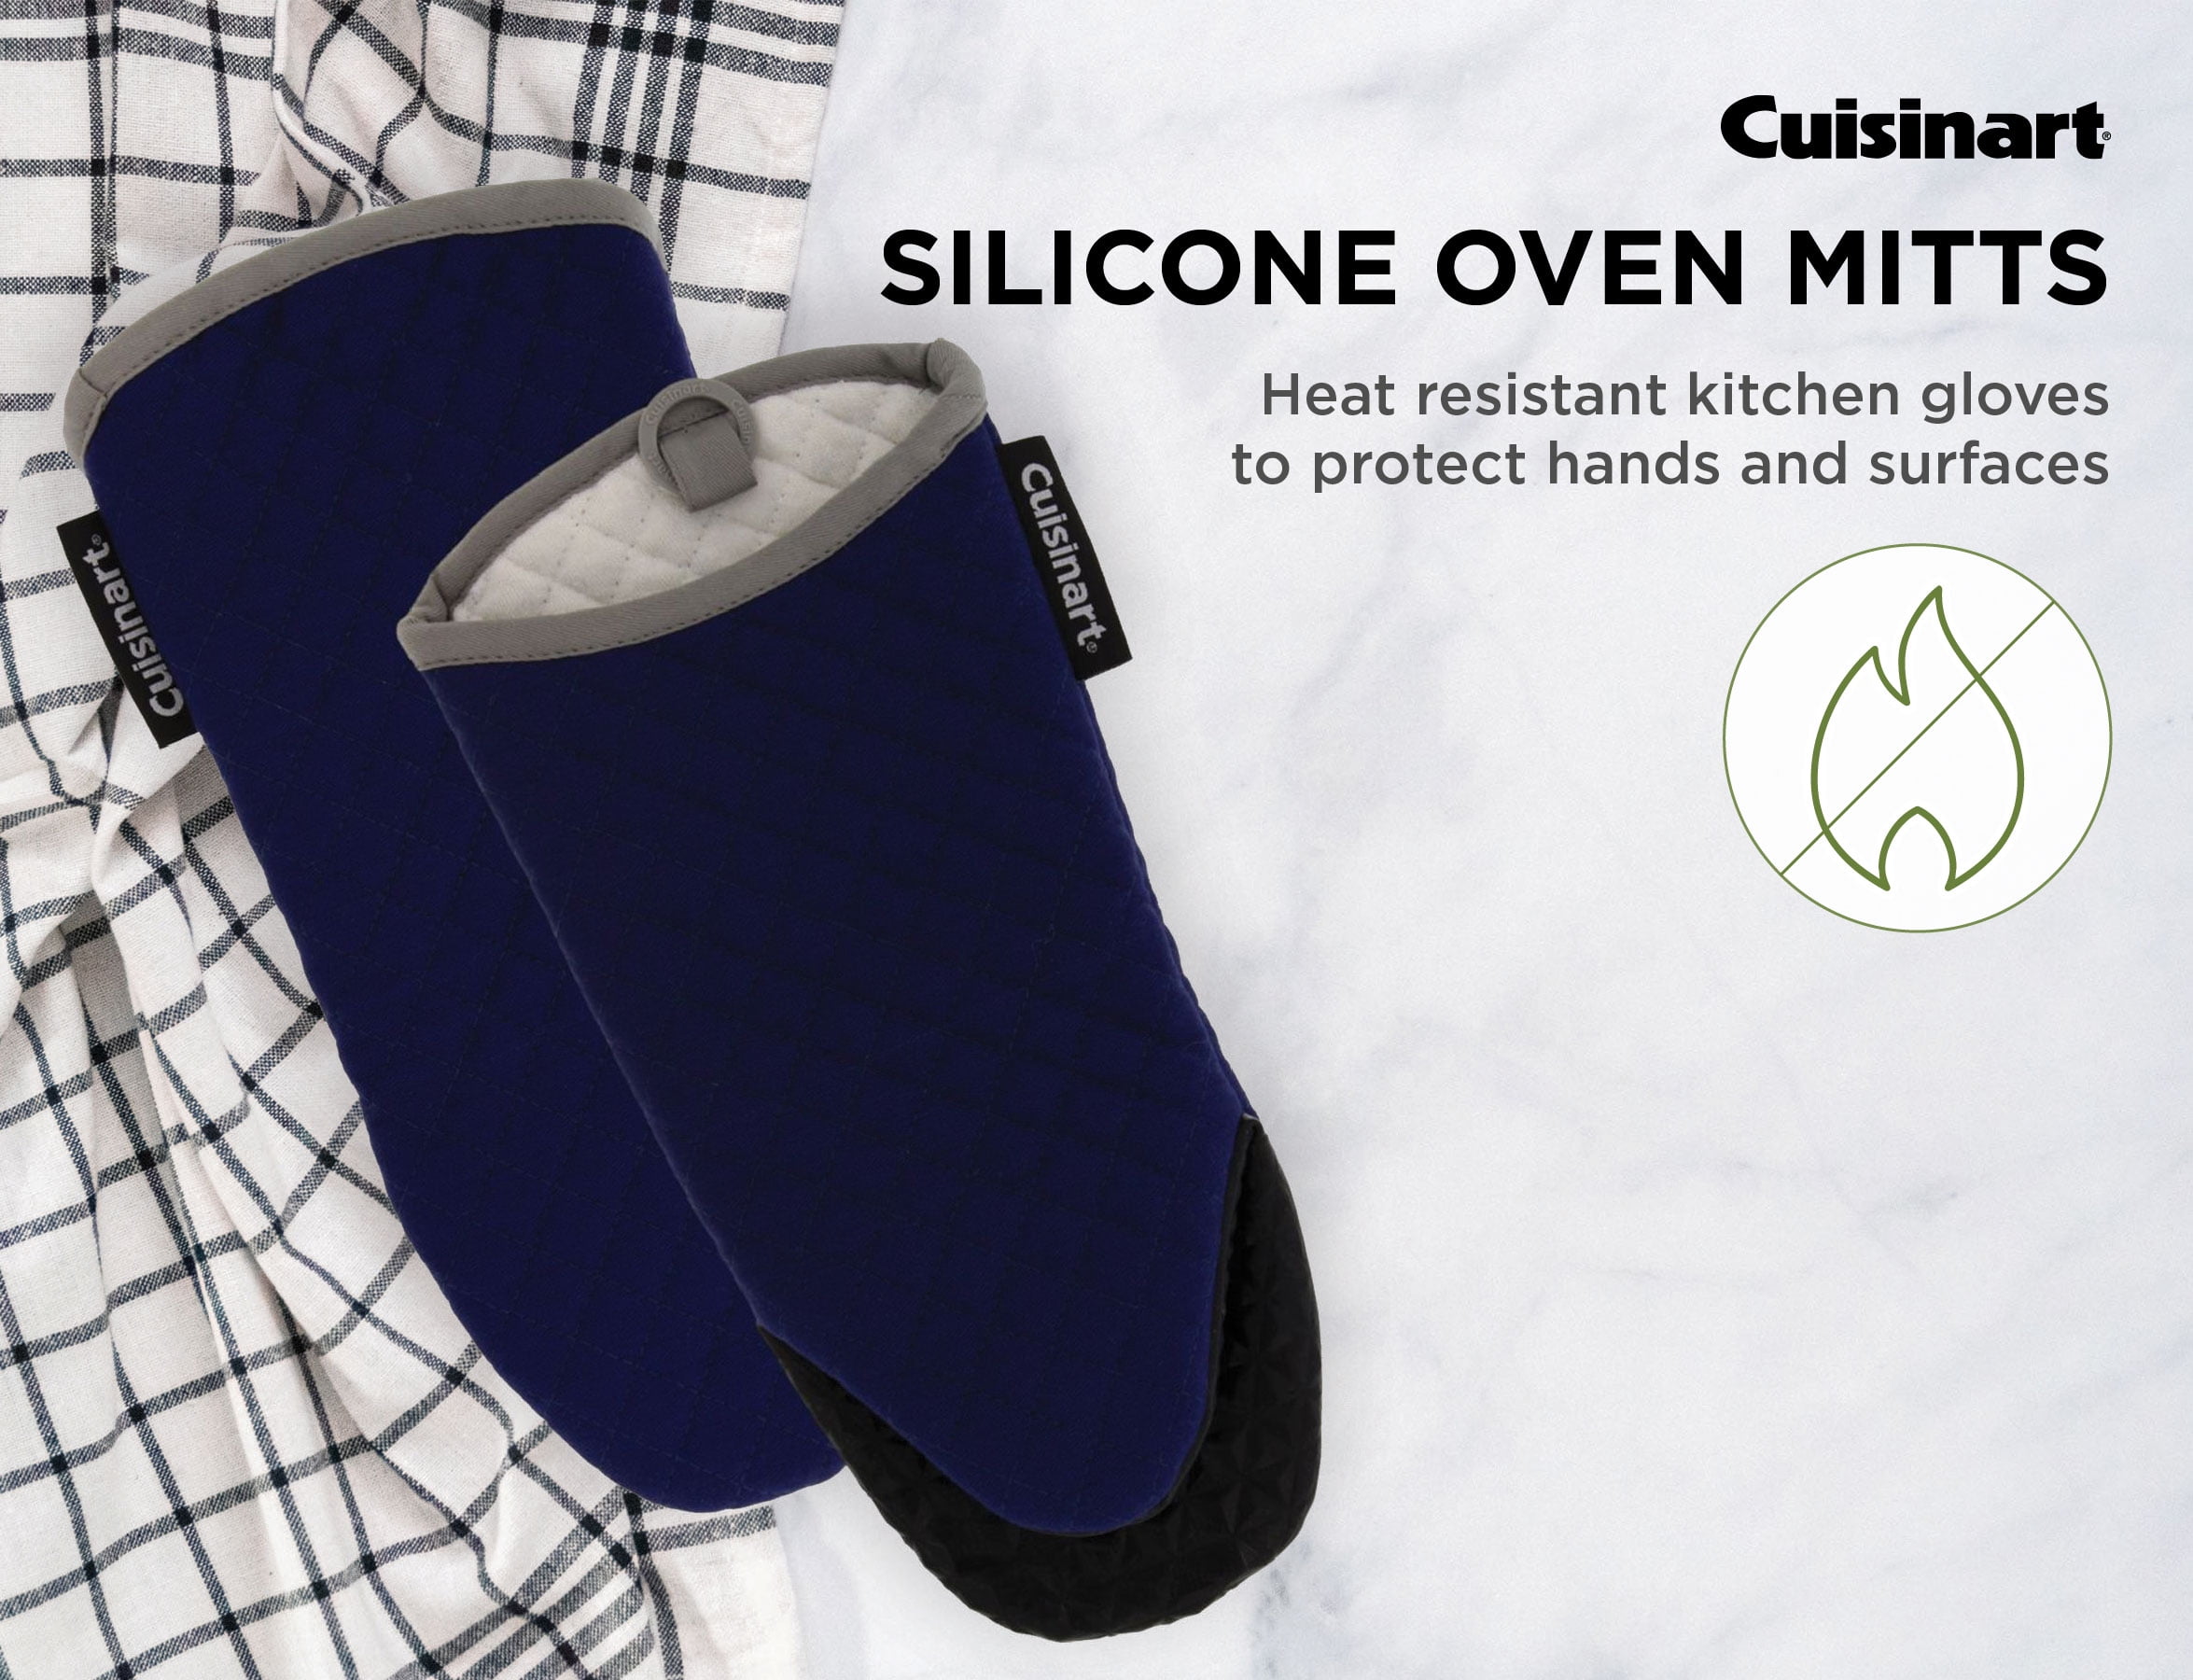 Cuisinart Silicone Oven Mitts / Gloves - Heat Resistant up to 500 F, Handle  Hot Oven / Cooking Items Safely - Soft Insulated Deep Pockets, Non-Slip  Grip and Convenient Hanging Loop 